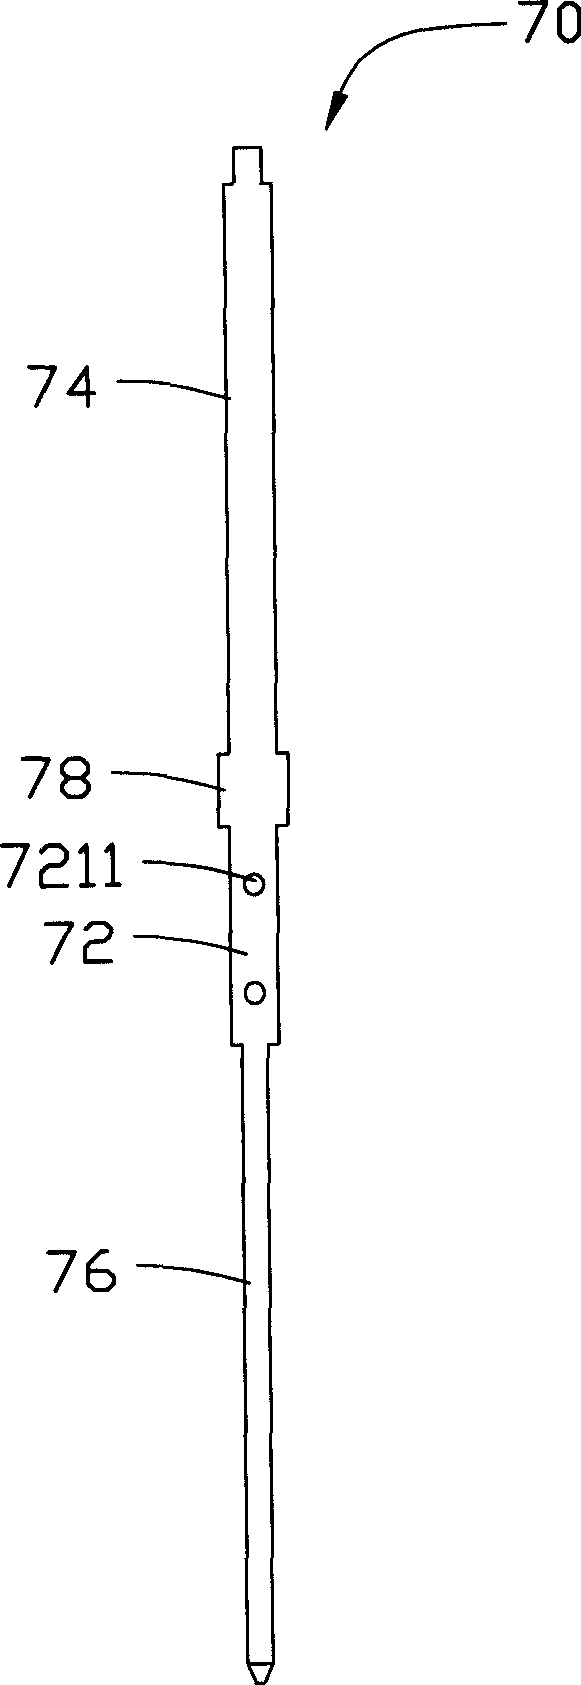 Method for mfg. connectors